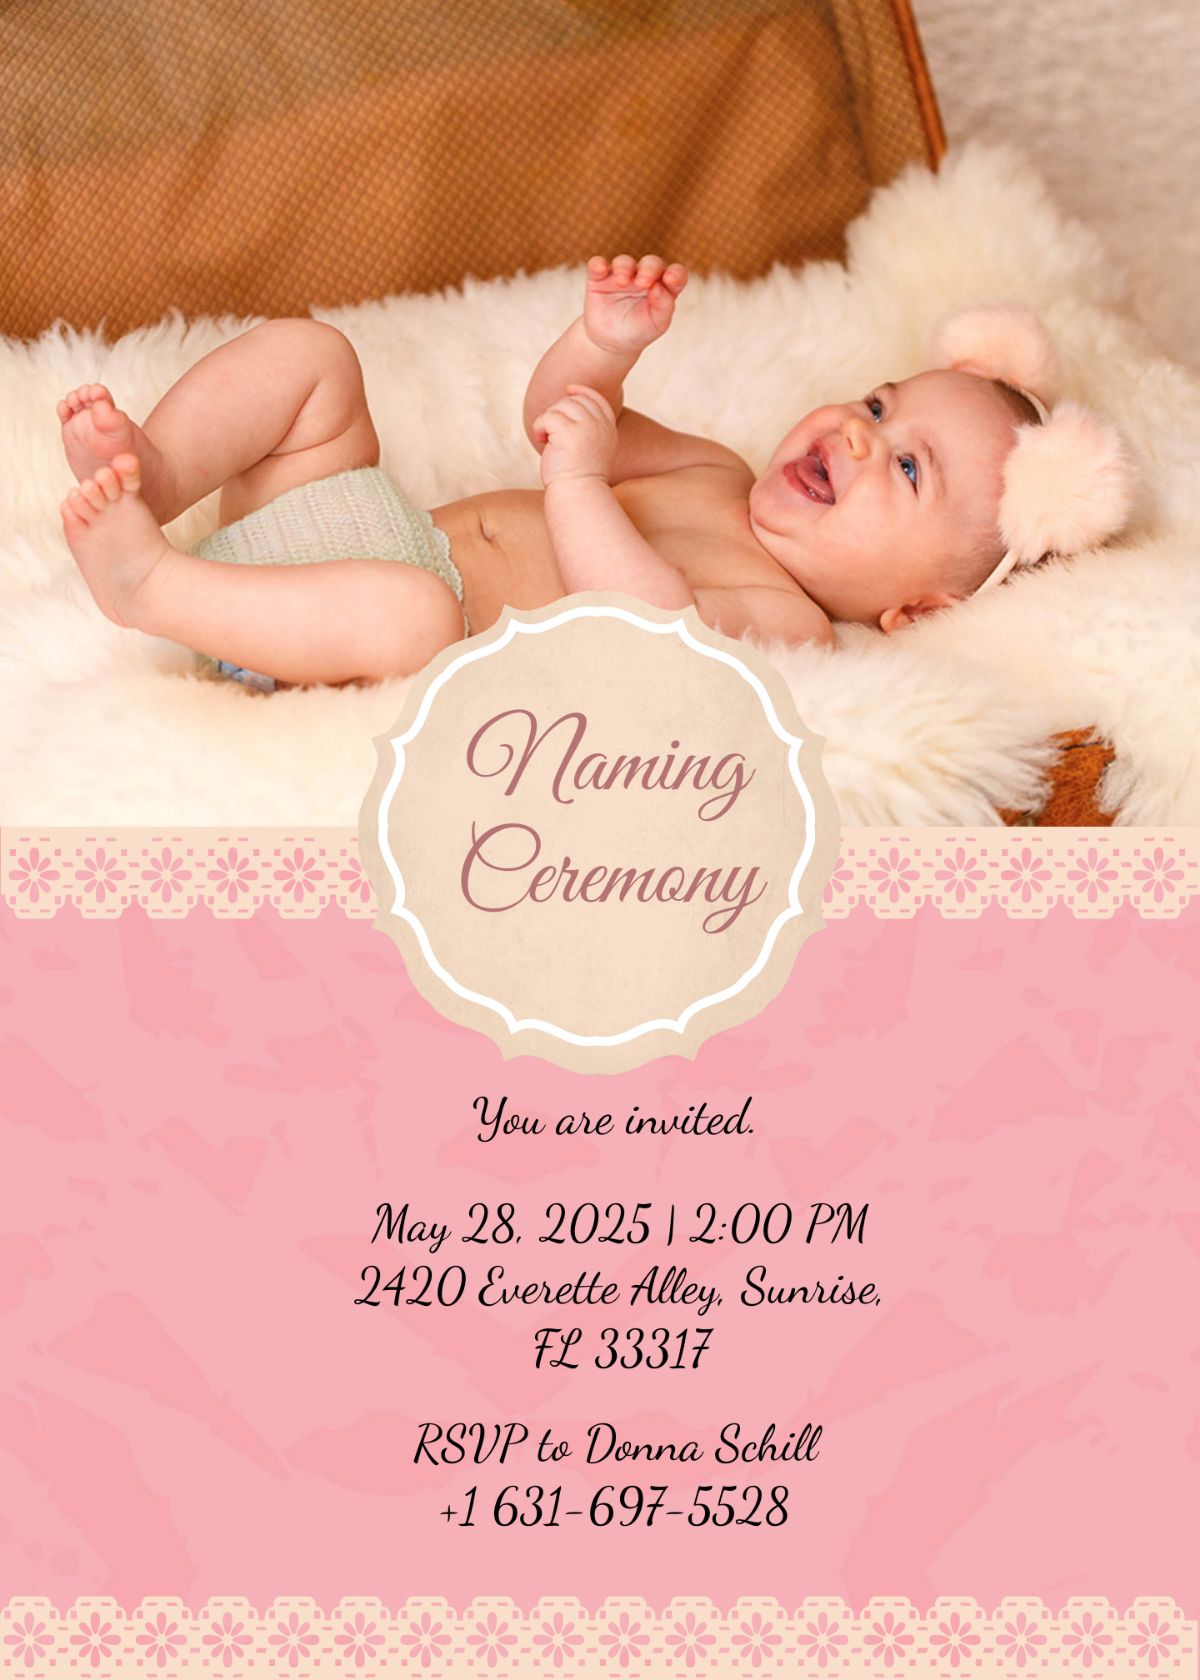 Grand Daughter Naming Ceremony Invitation Card Template